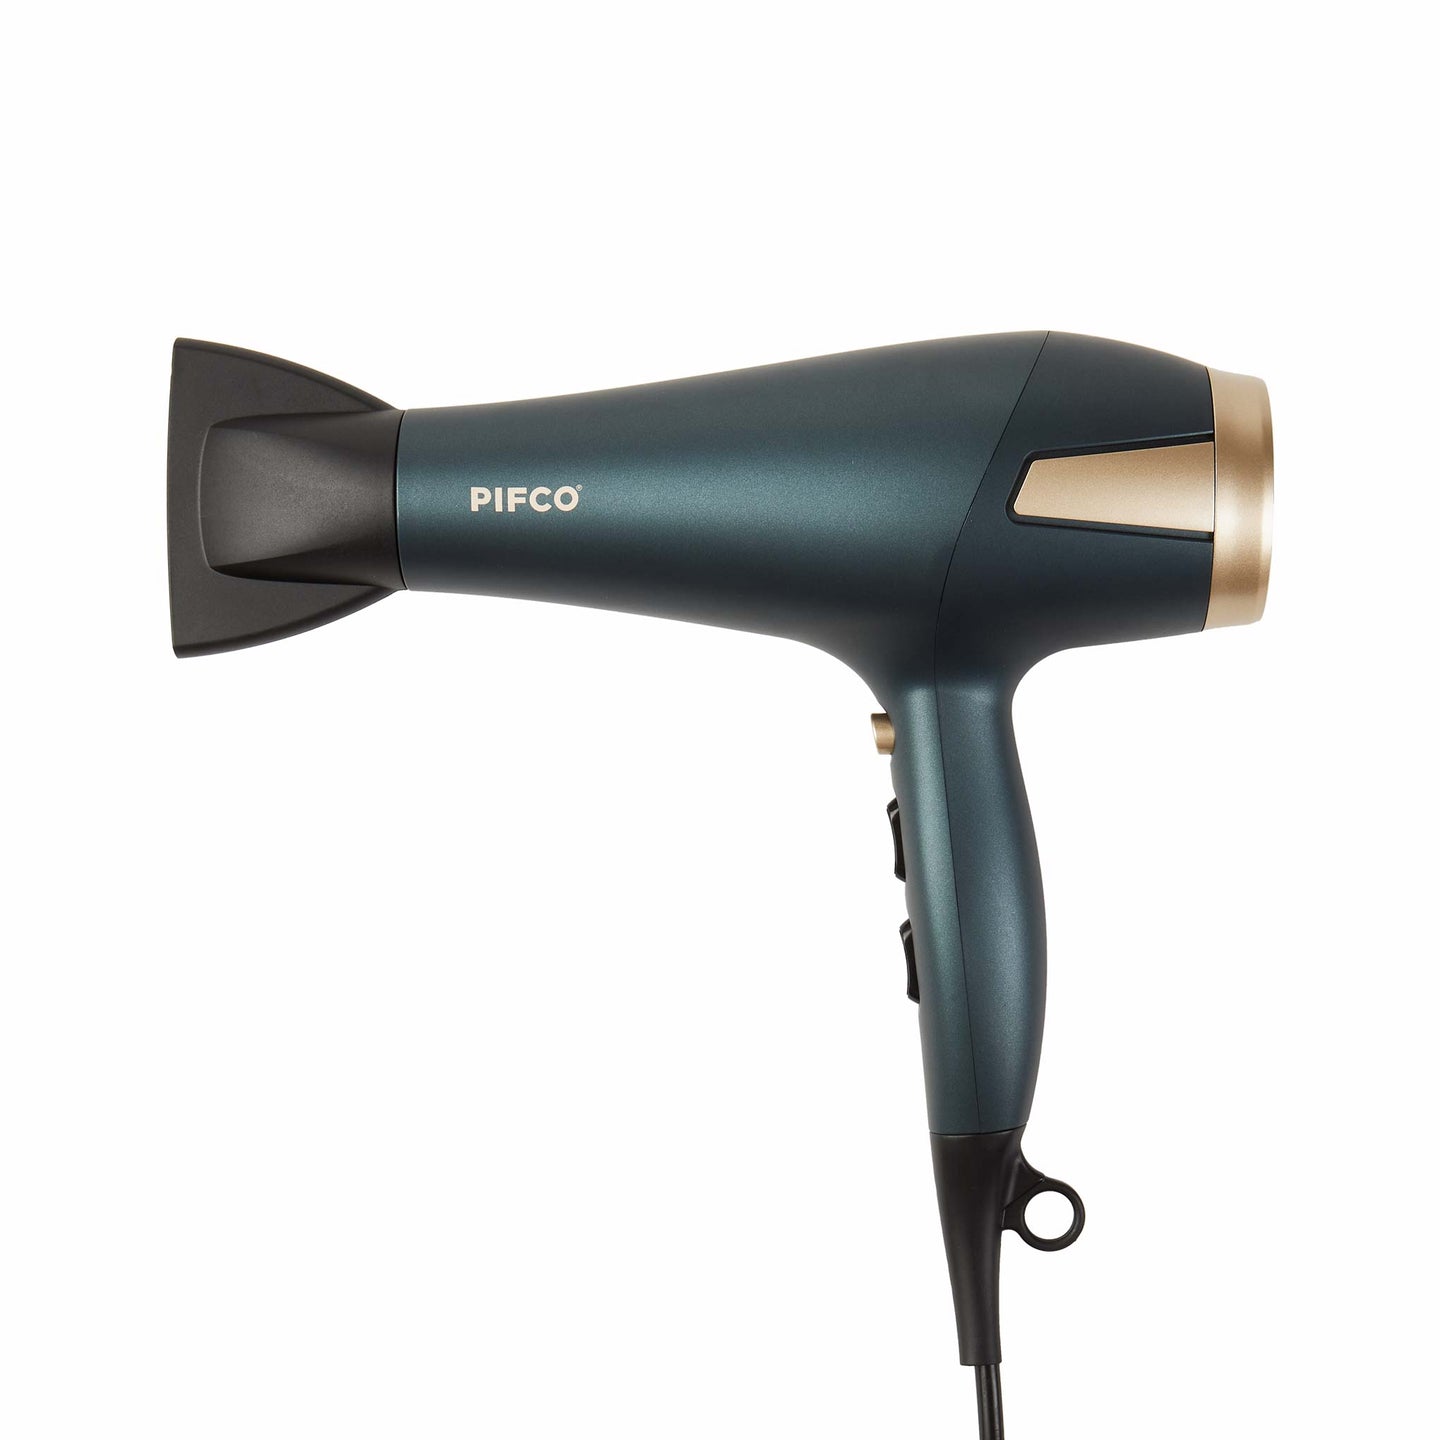 PIFCO Smooth Dry & Curl 2500W Hairdryer